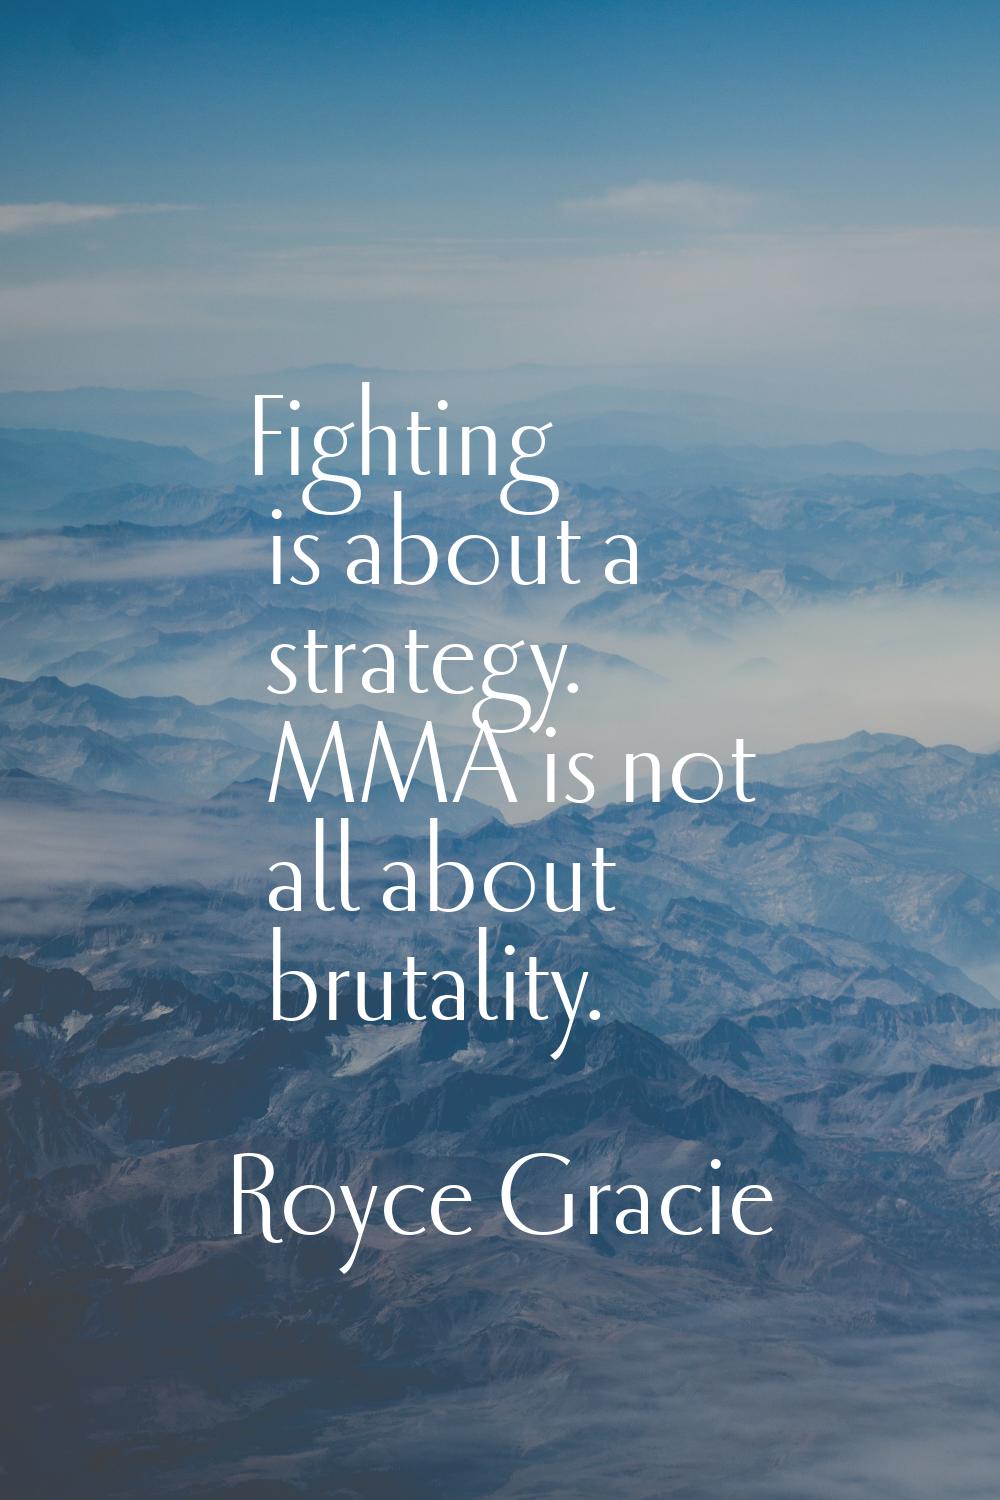 Fighting is about a strategy. MMA is not all about brutality.